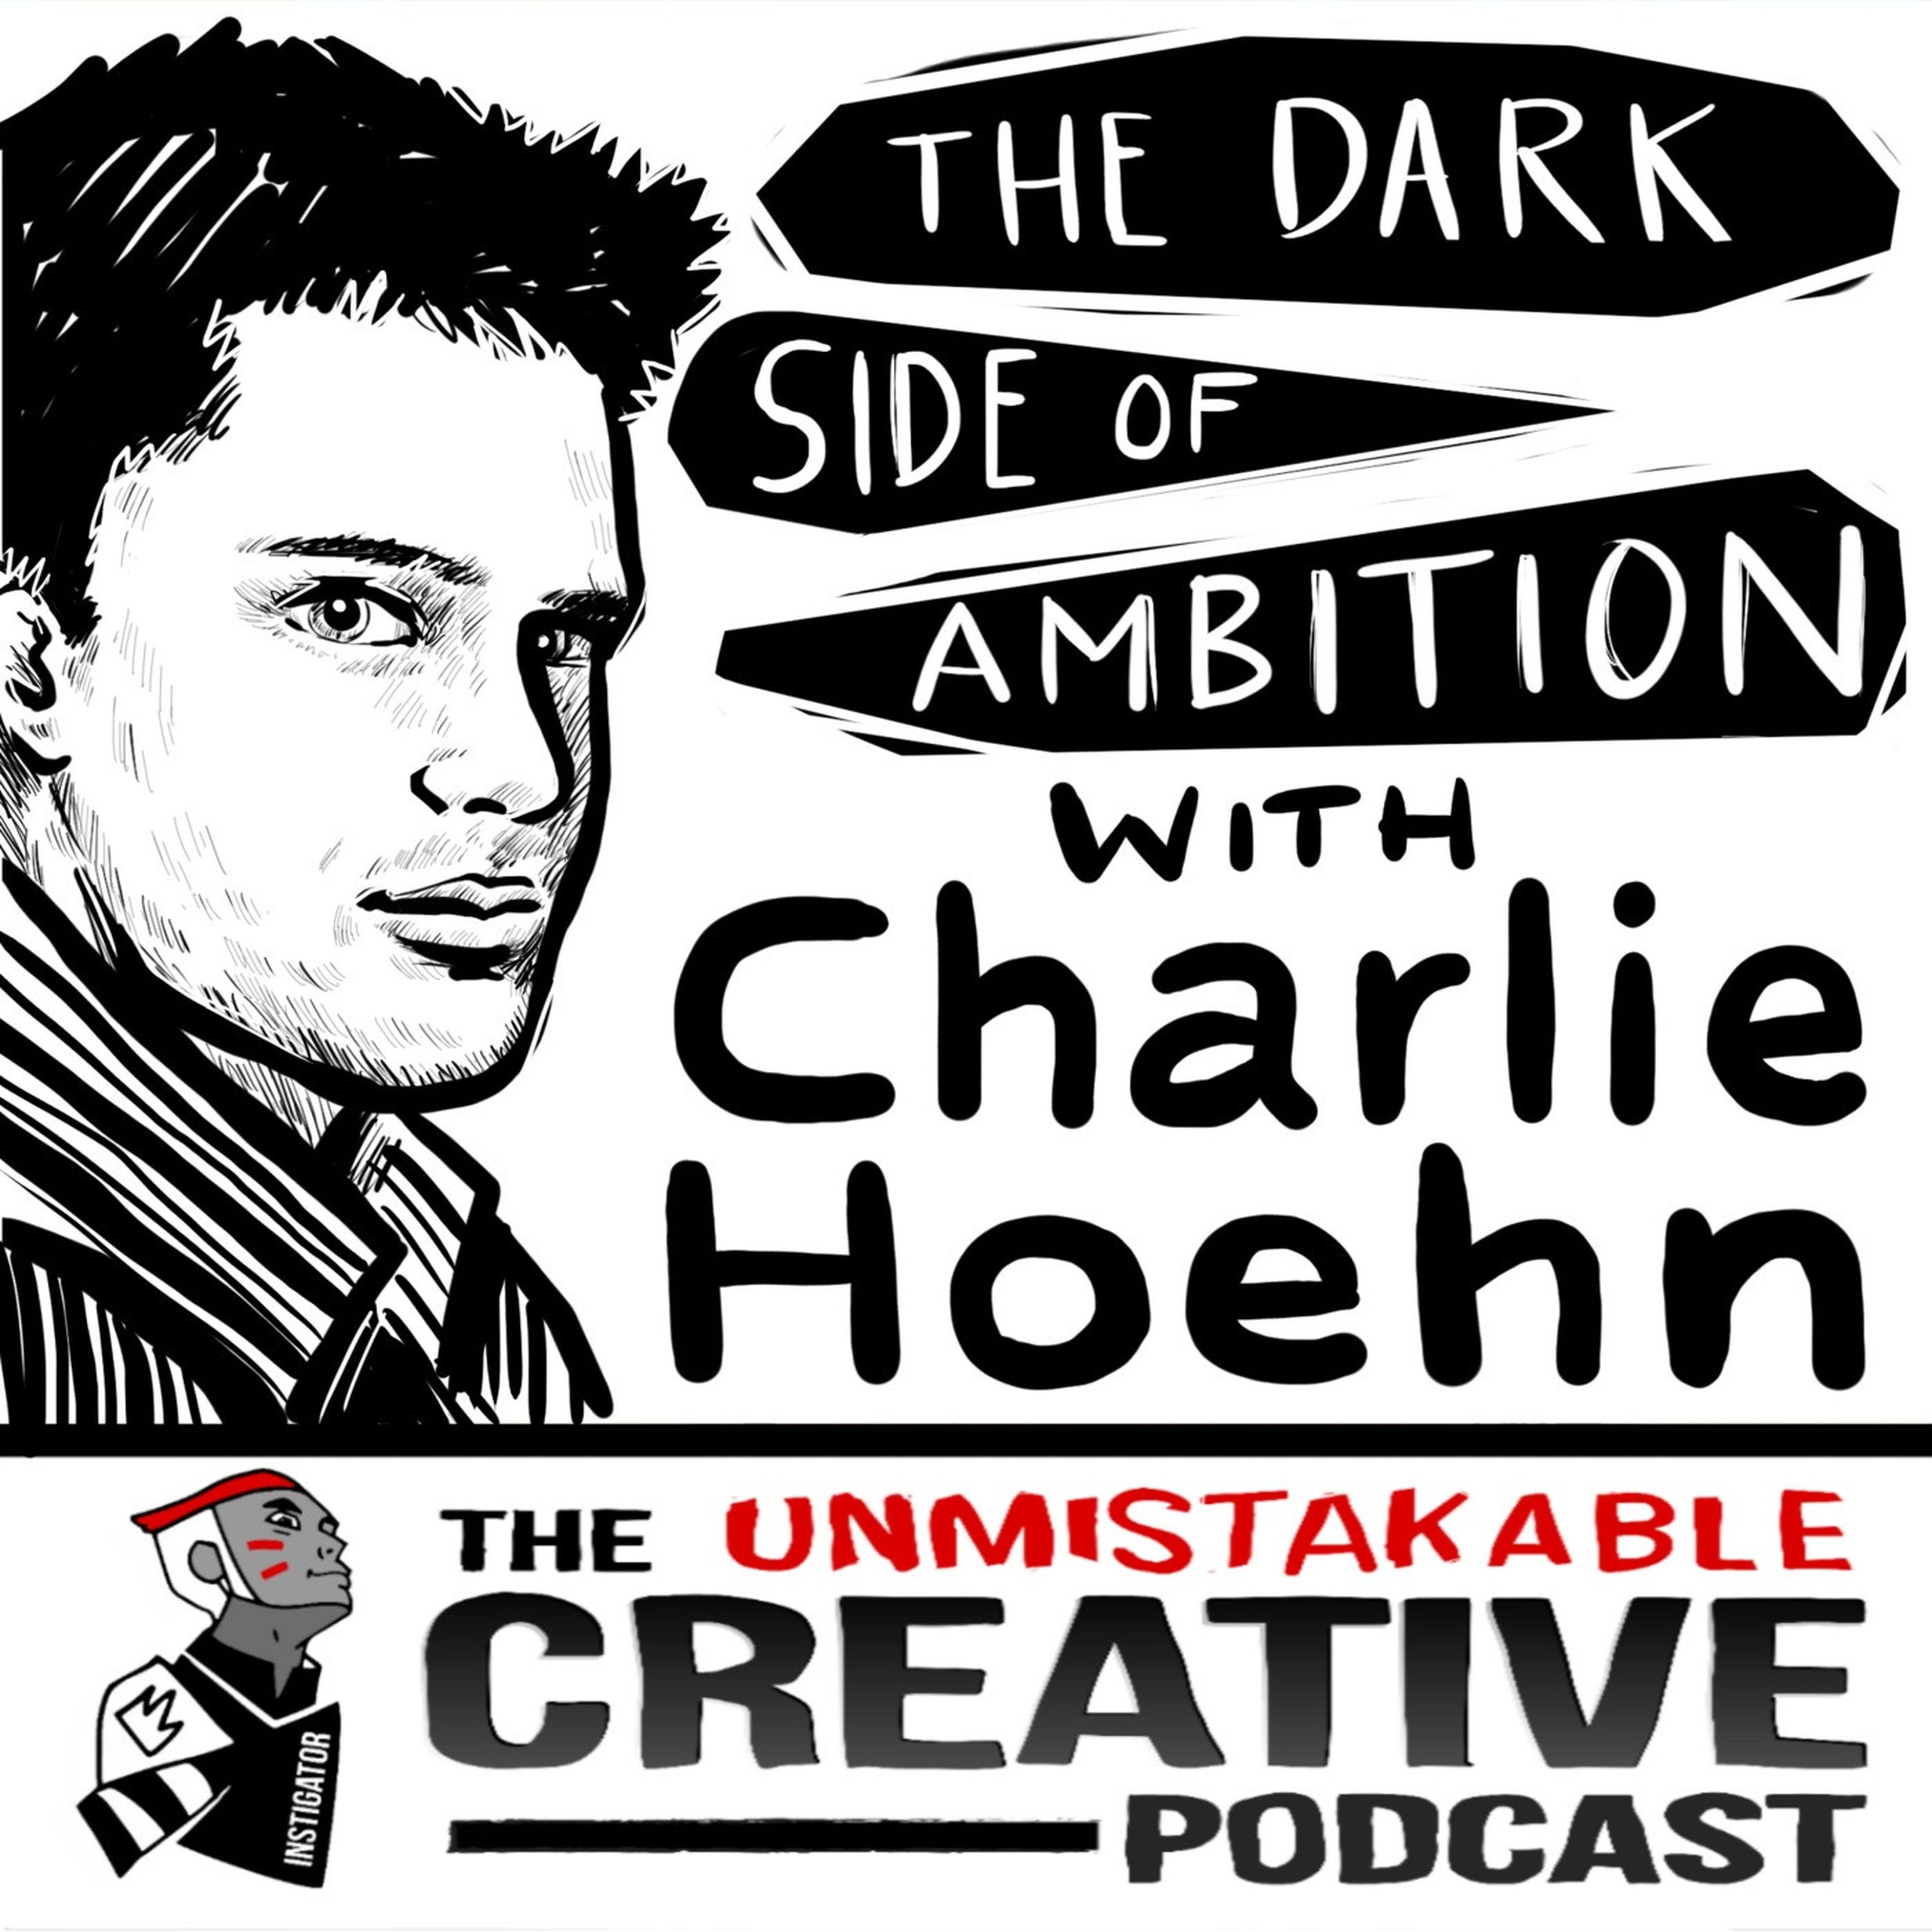 The Dark Side of Ambition with Charlie Hoehn Image